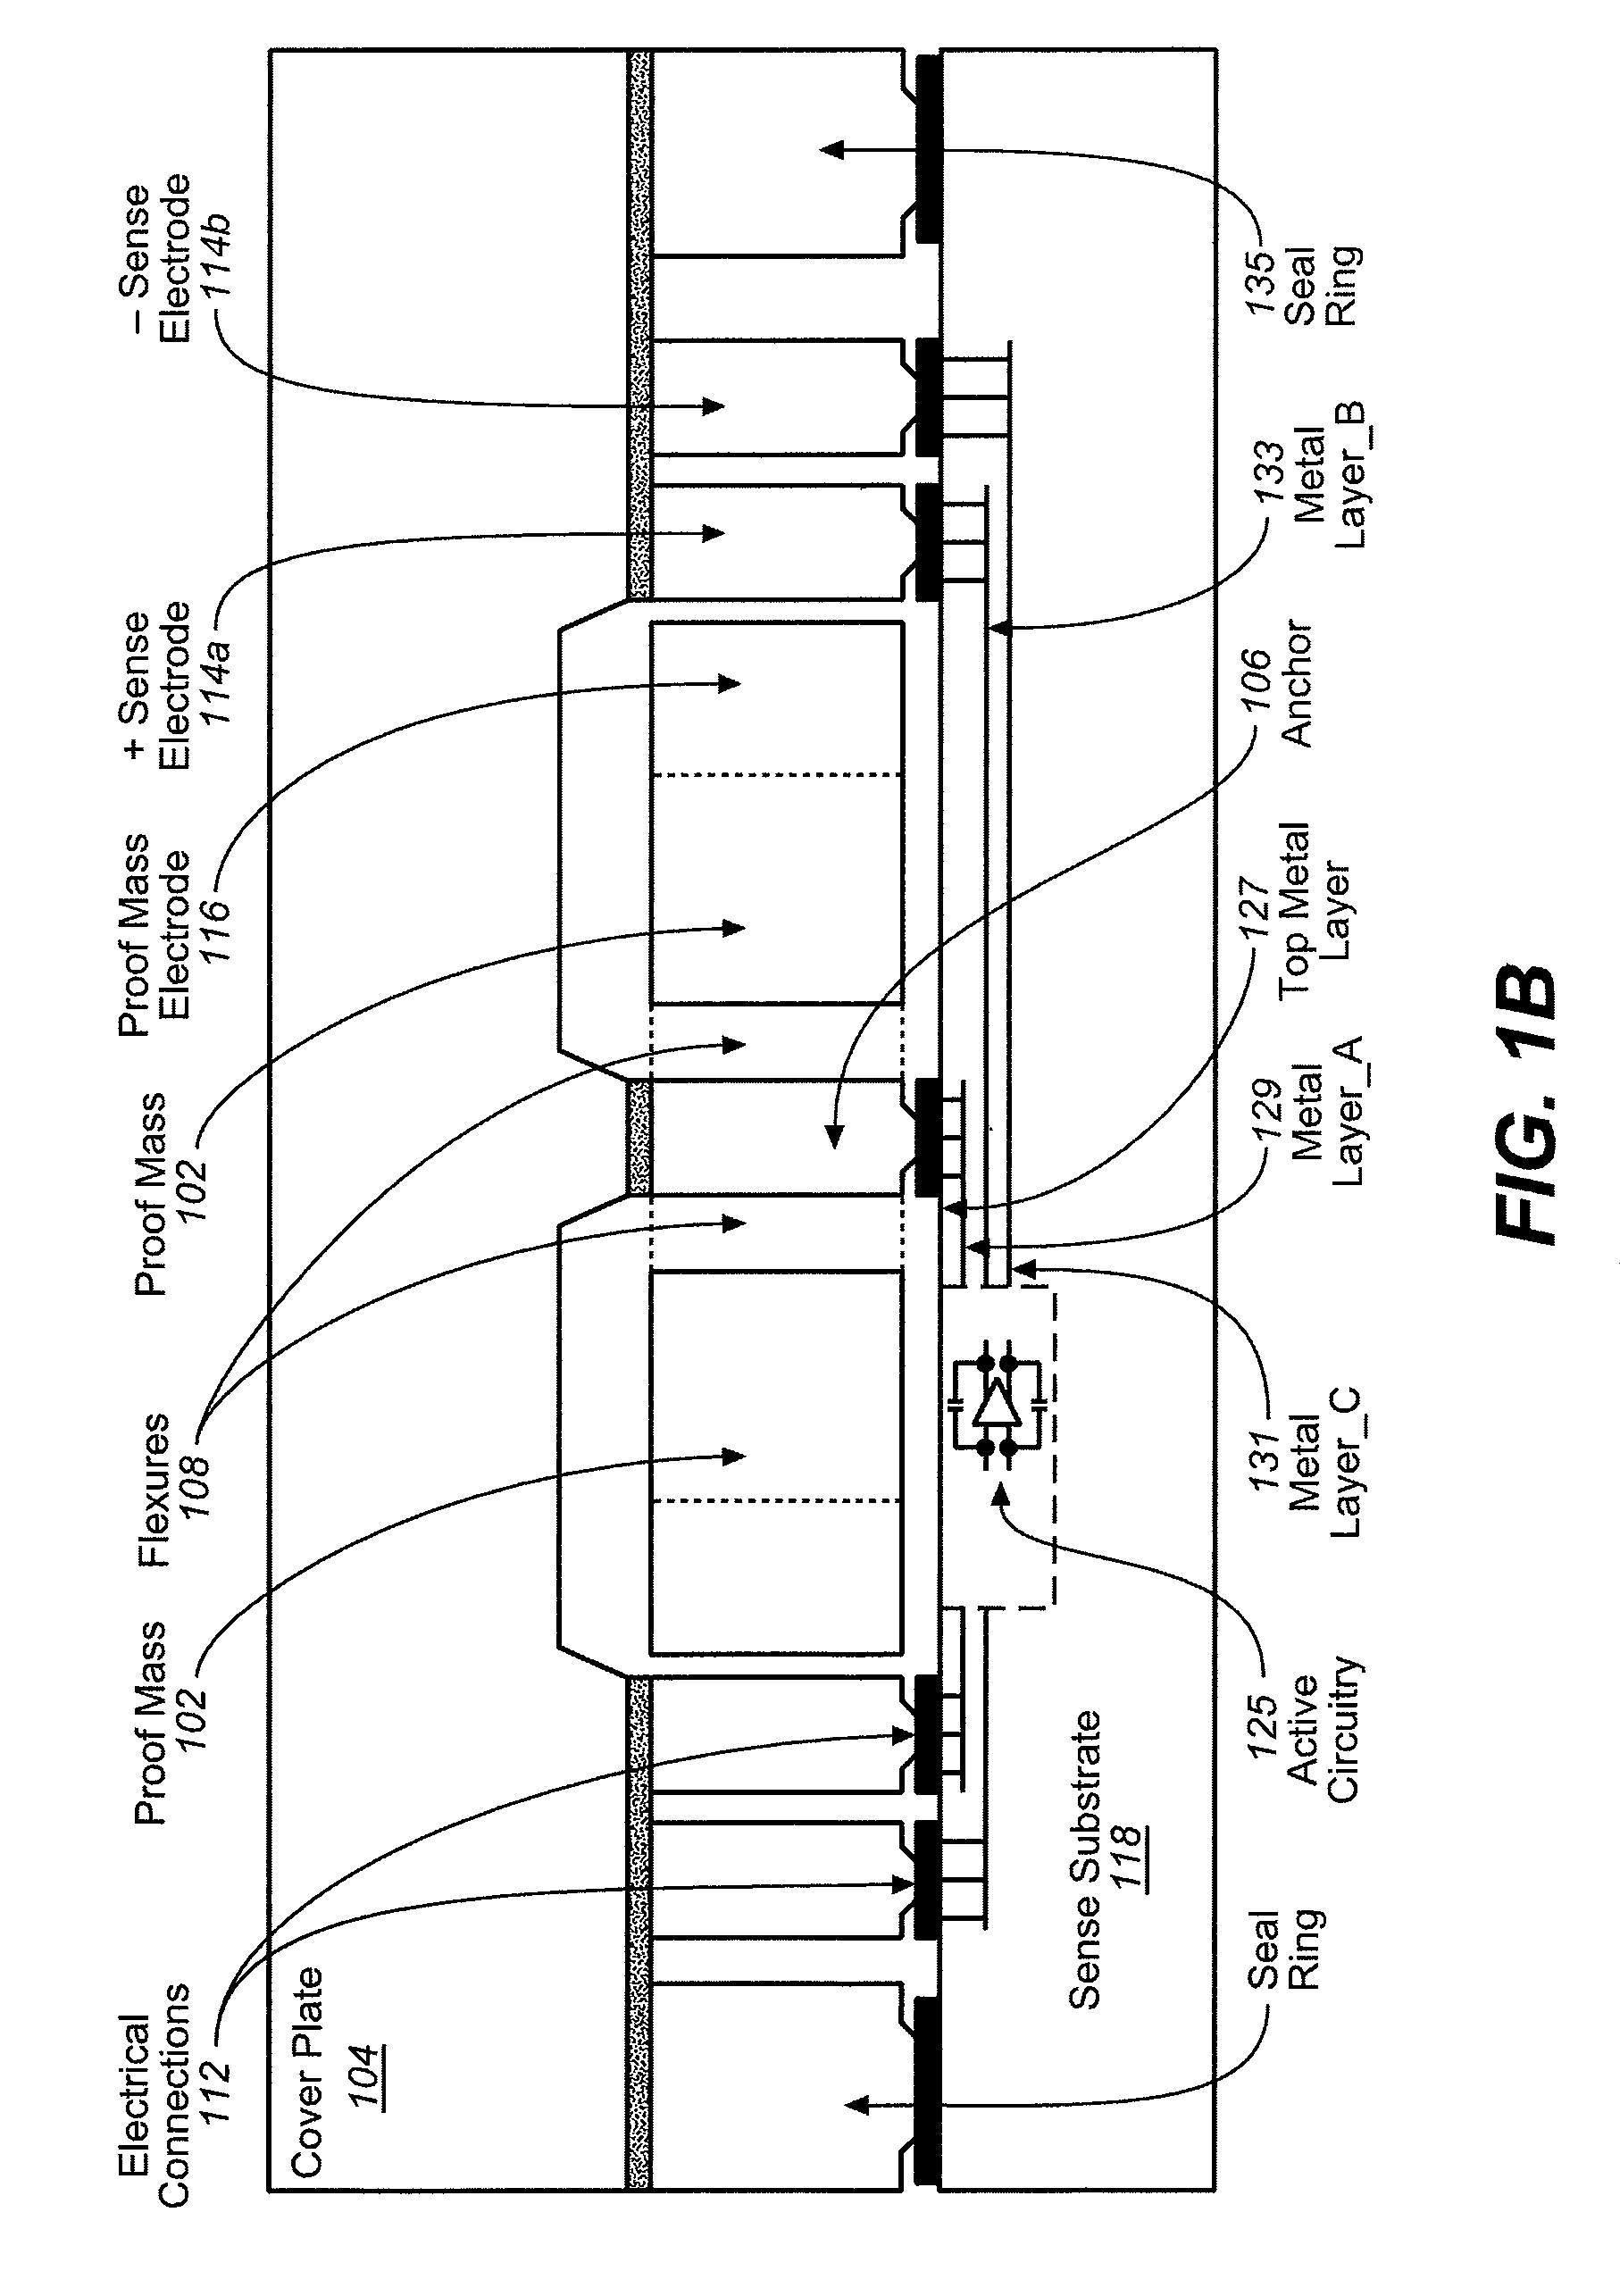 Vertically integrated 3-axis MEMS angular accelerometer with integrated electronics